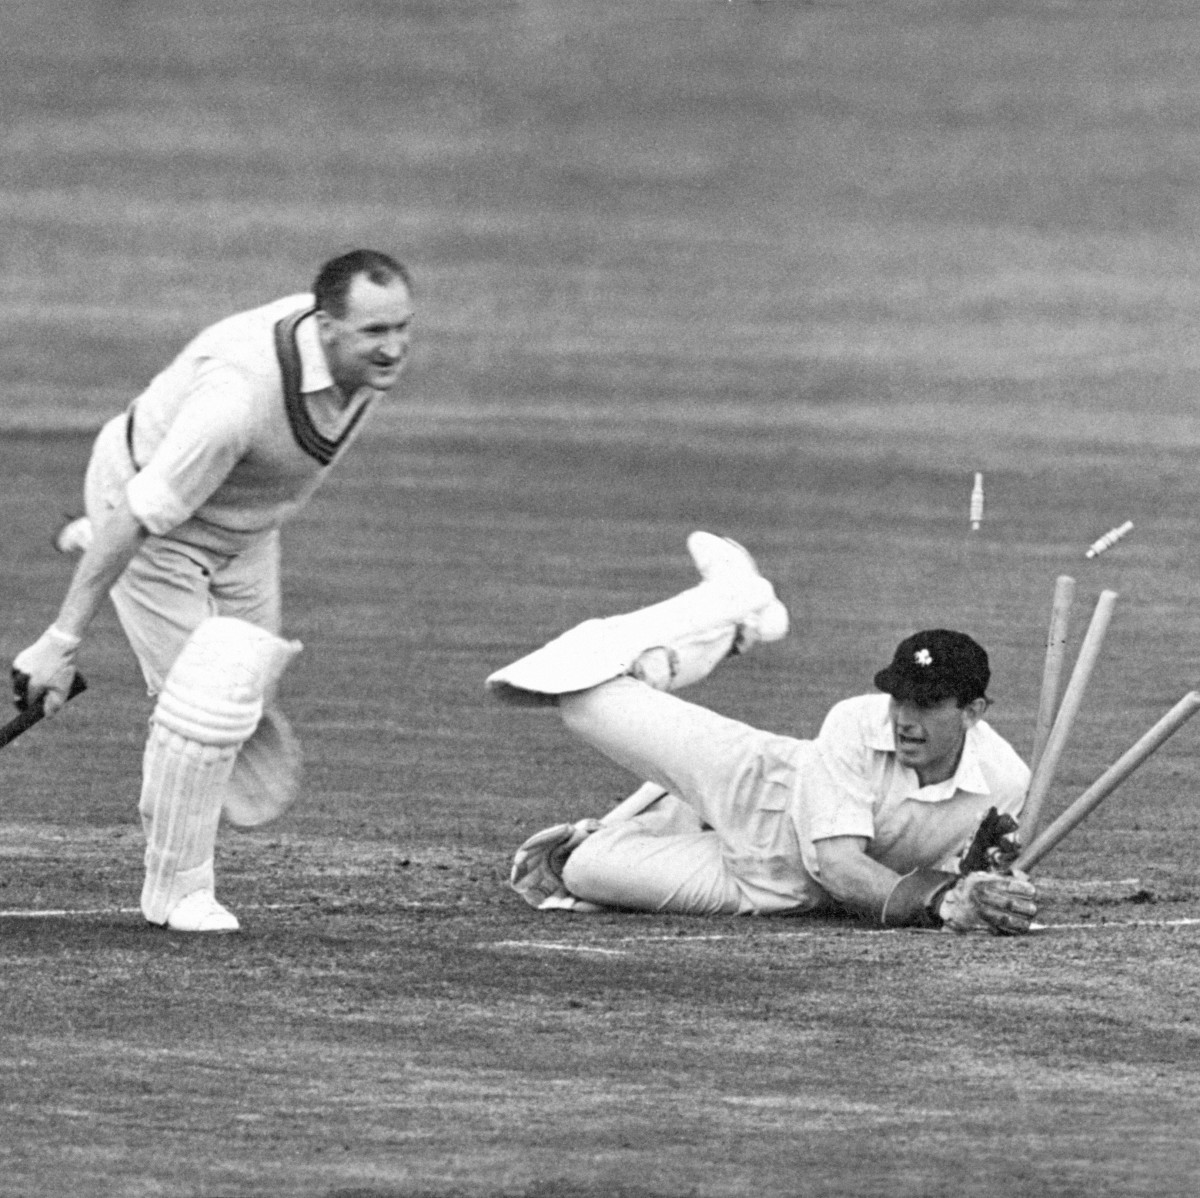 Kent Wicket Keeper Derek Ufton dives through the wicket and sends the bails flying, but his only reward is a grin from Somersets Australian born batsman William Alley, who gets to the crease in time - but only just. Alley was batting in Somersets